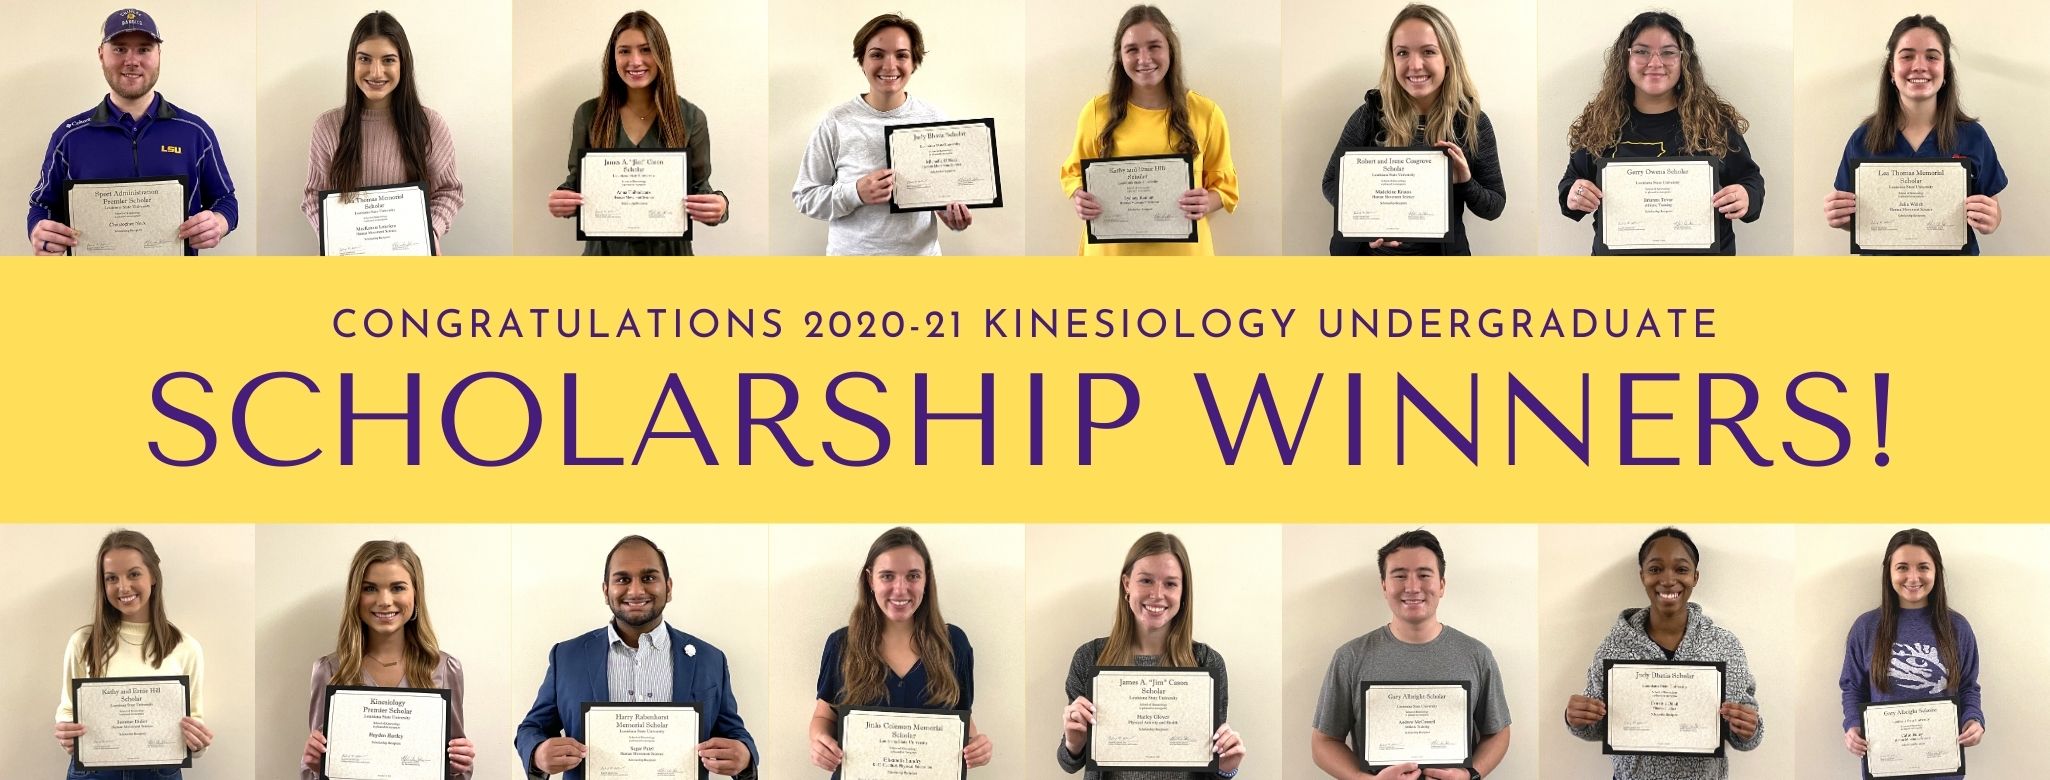 collage of students with certificates; yellow background with purple text: Congradulations 2020-21 Kinesiology Undergraduate Scholarship Winners!